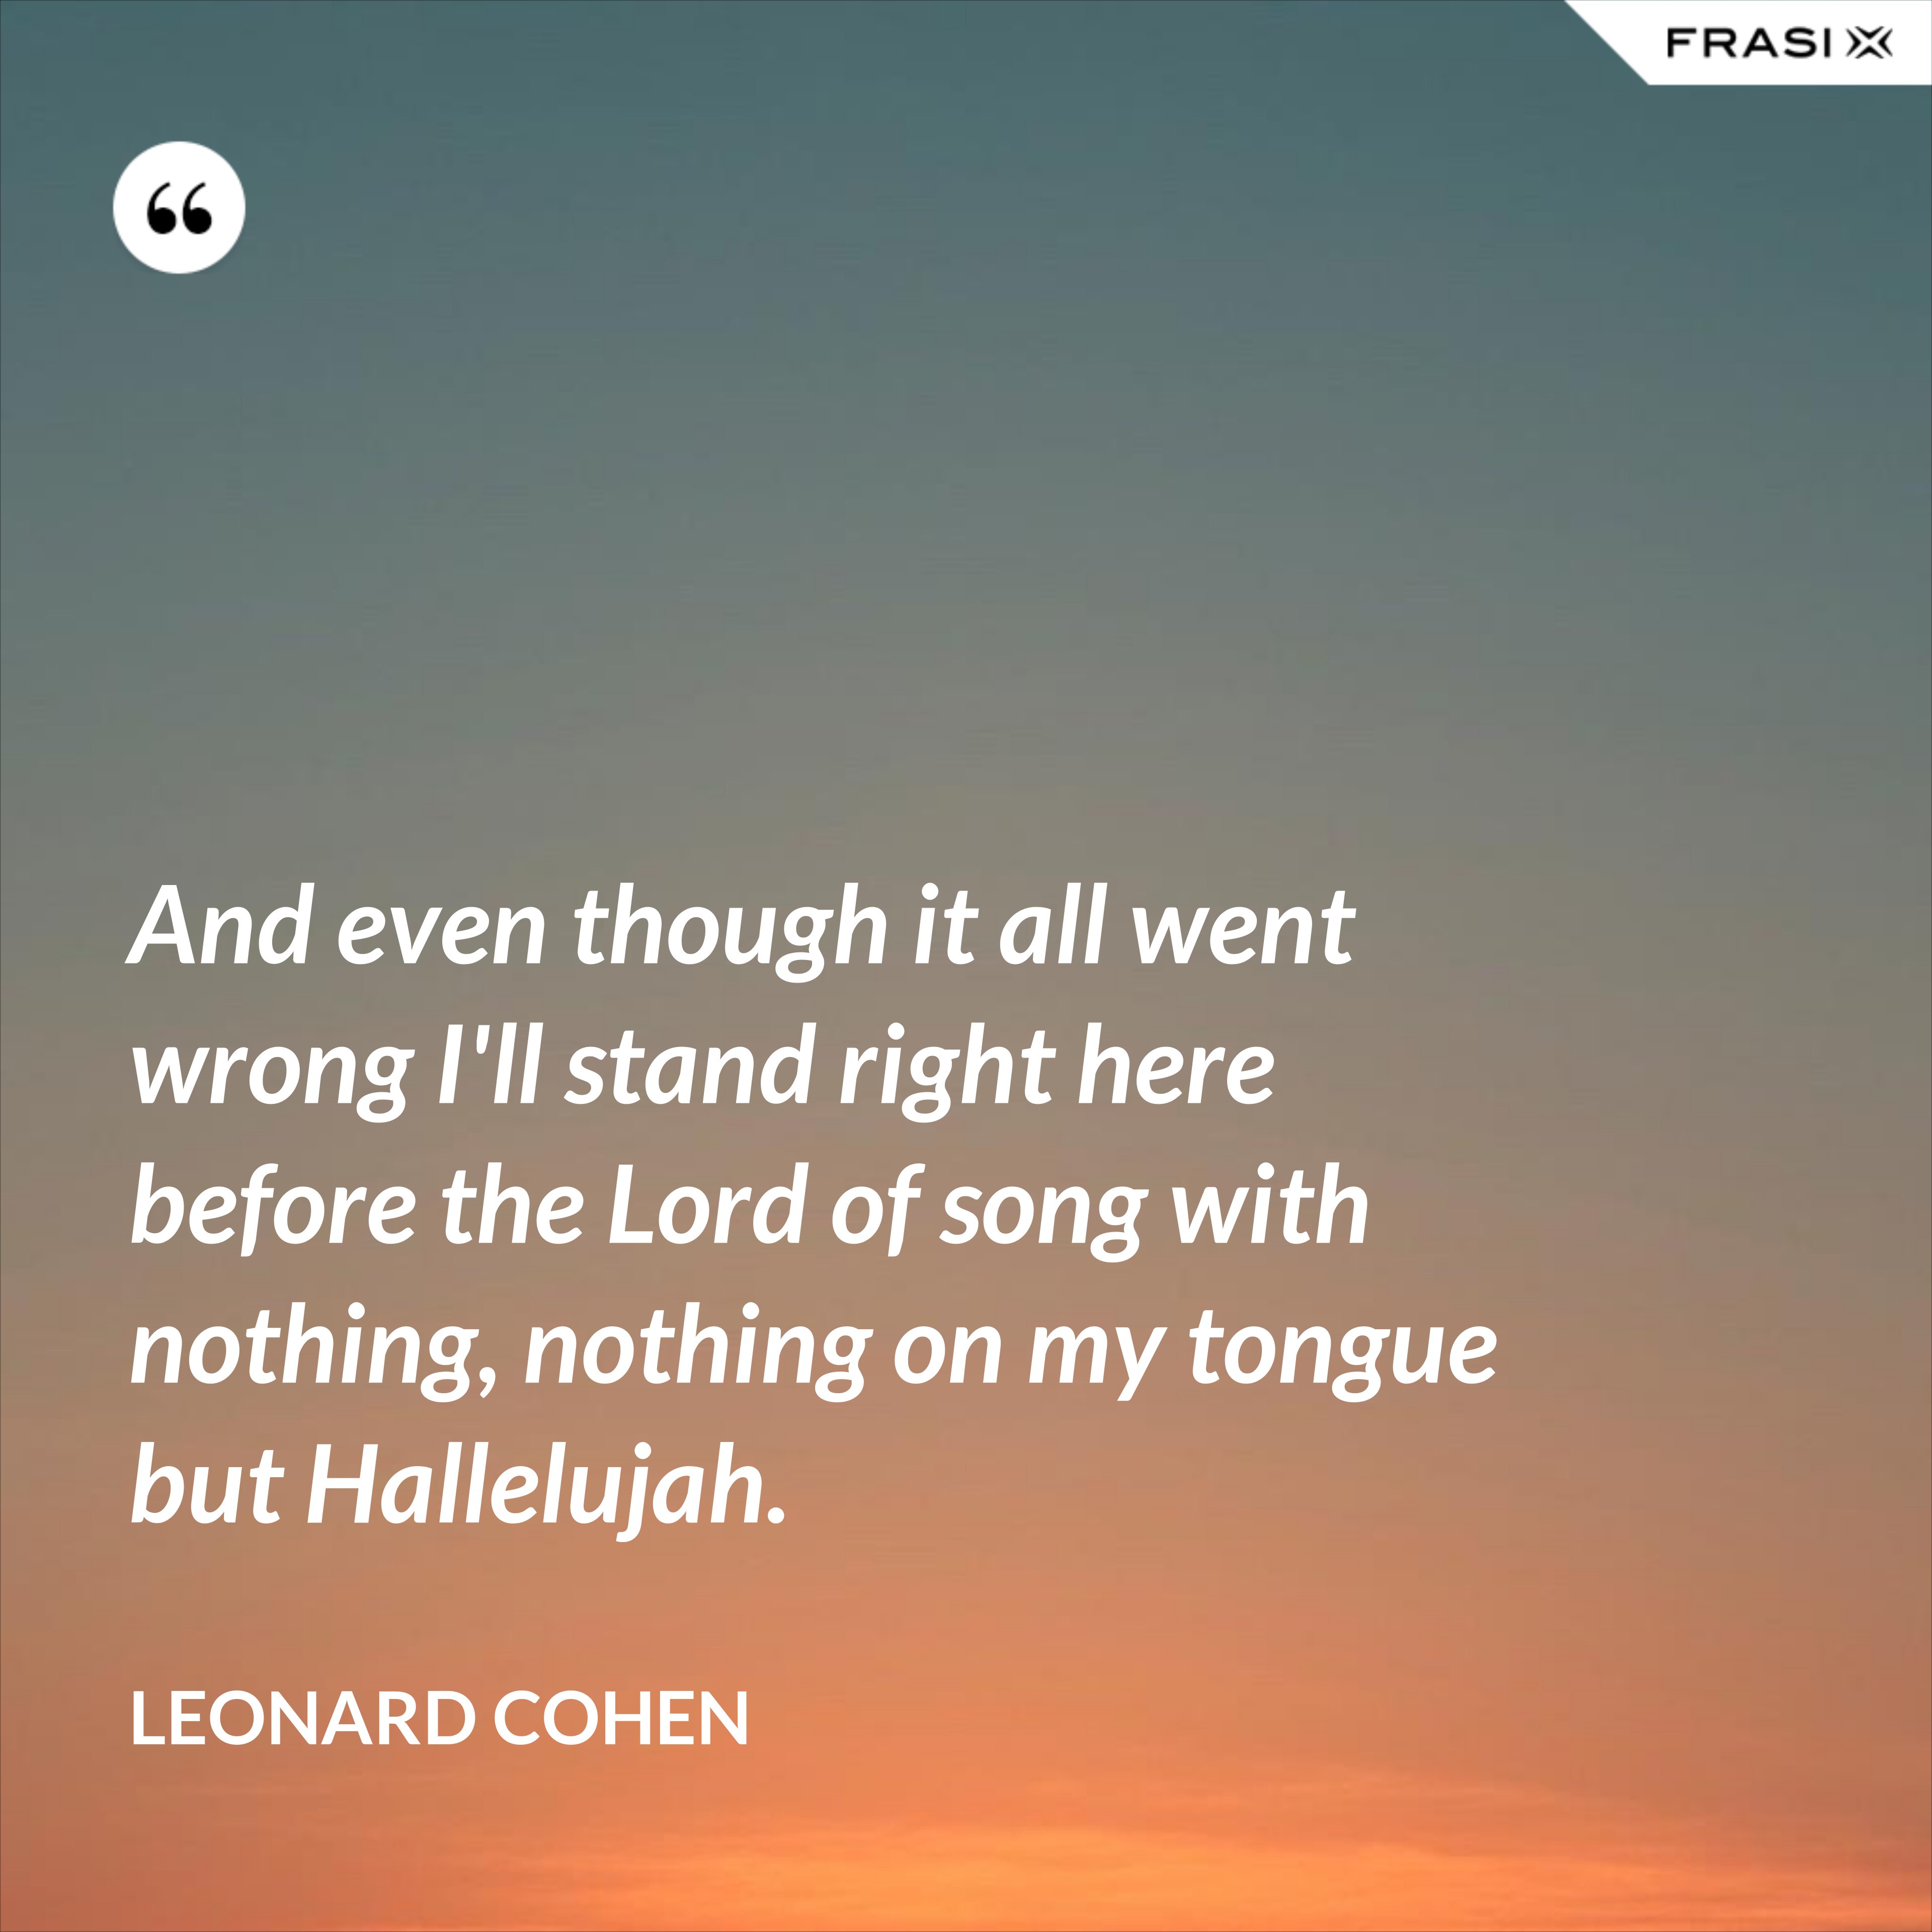 And even though it all went wrong I'll stand right here before the Lord of song with nothing, nothing on my tongue but Hallelujah. - Leonard Cohen